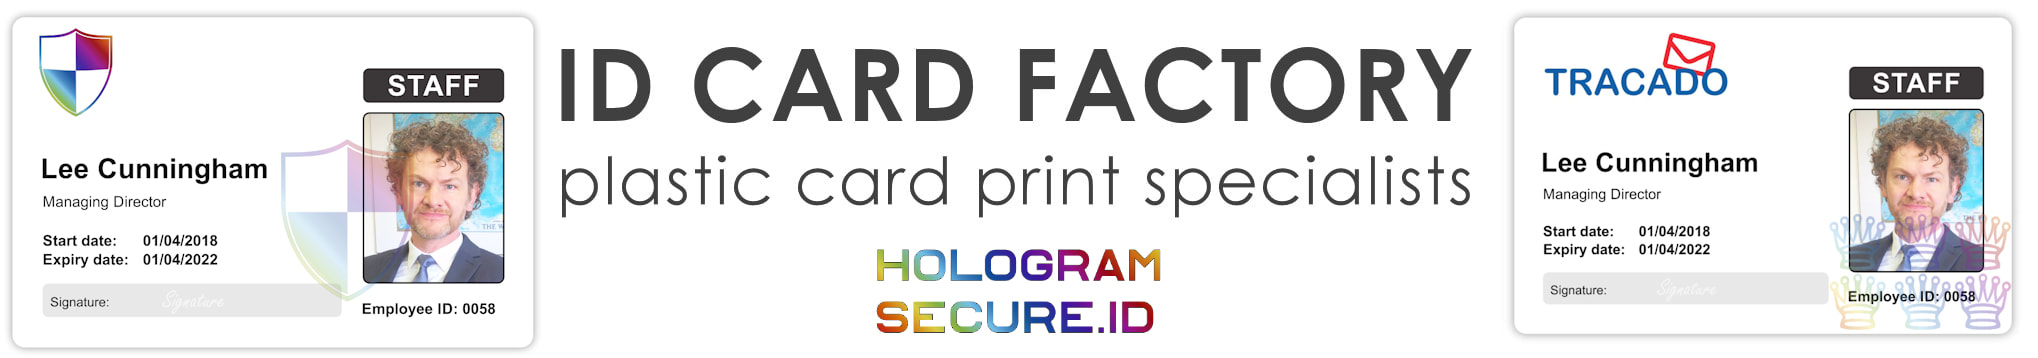 UK print service holographic ID cards | examples of staff photo ID cards | samples of employee Identity card printing | Workers ID cards printed with hologram